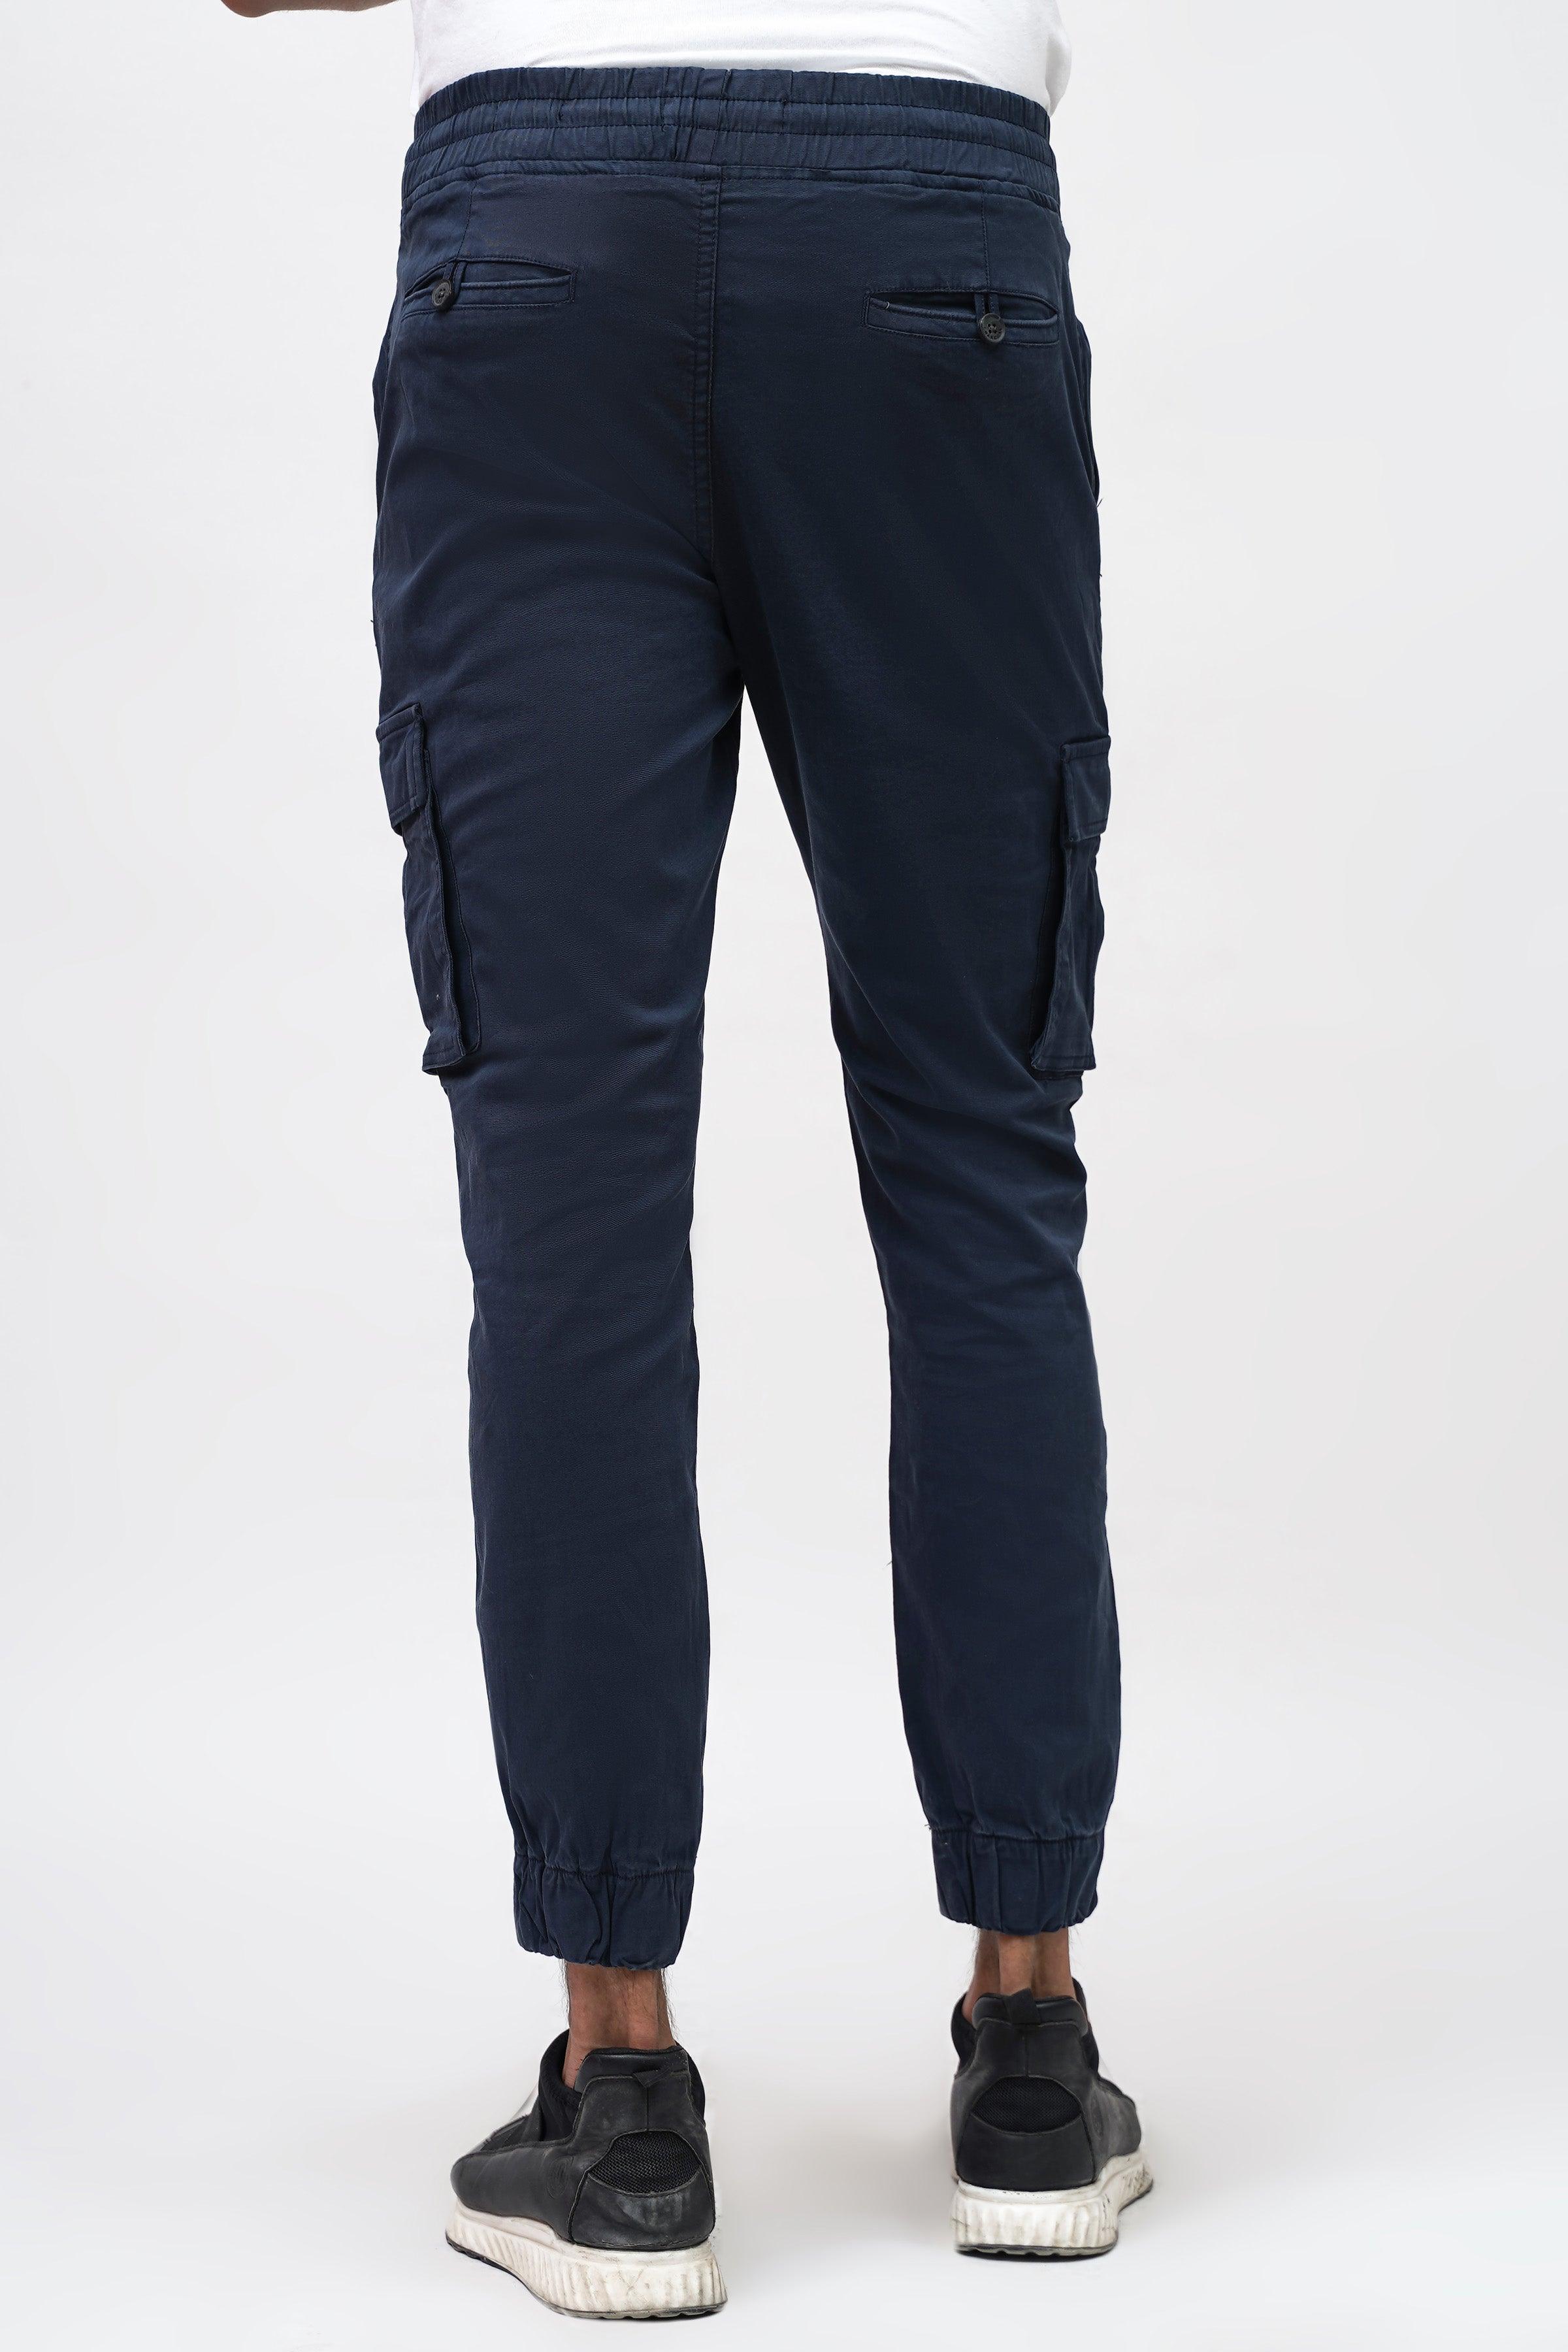 CARGO SLIM FIT NAVY TROUSER at Charcoal Clothing